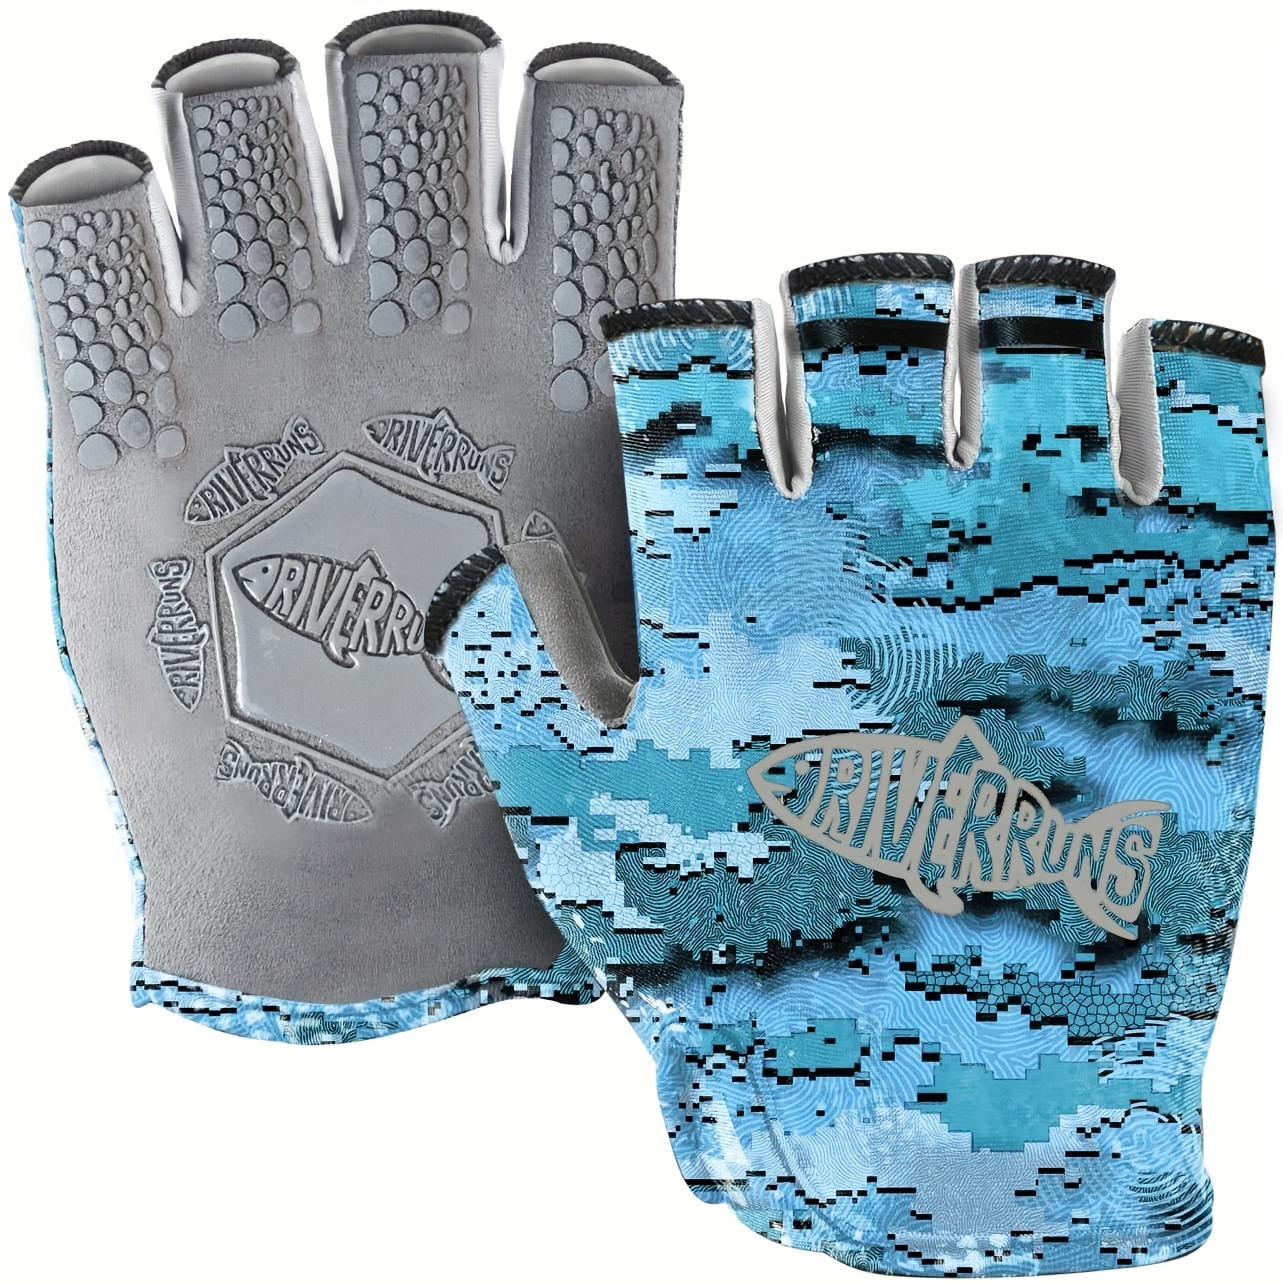  Fishing Gloves - Fish Monkey / Fishing Gloves / Fishing  Accessories: Sports & Outdoors